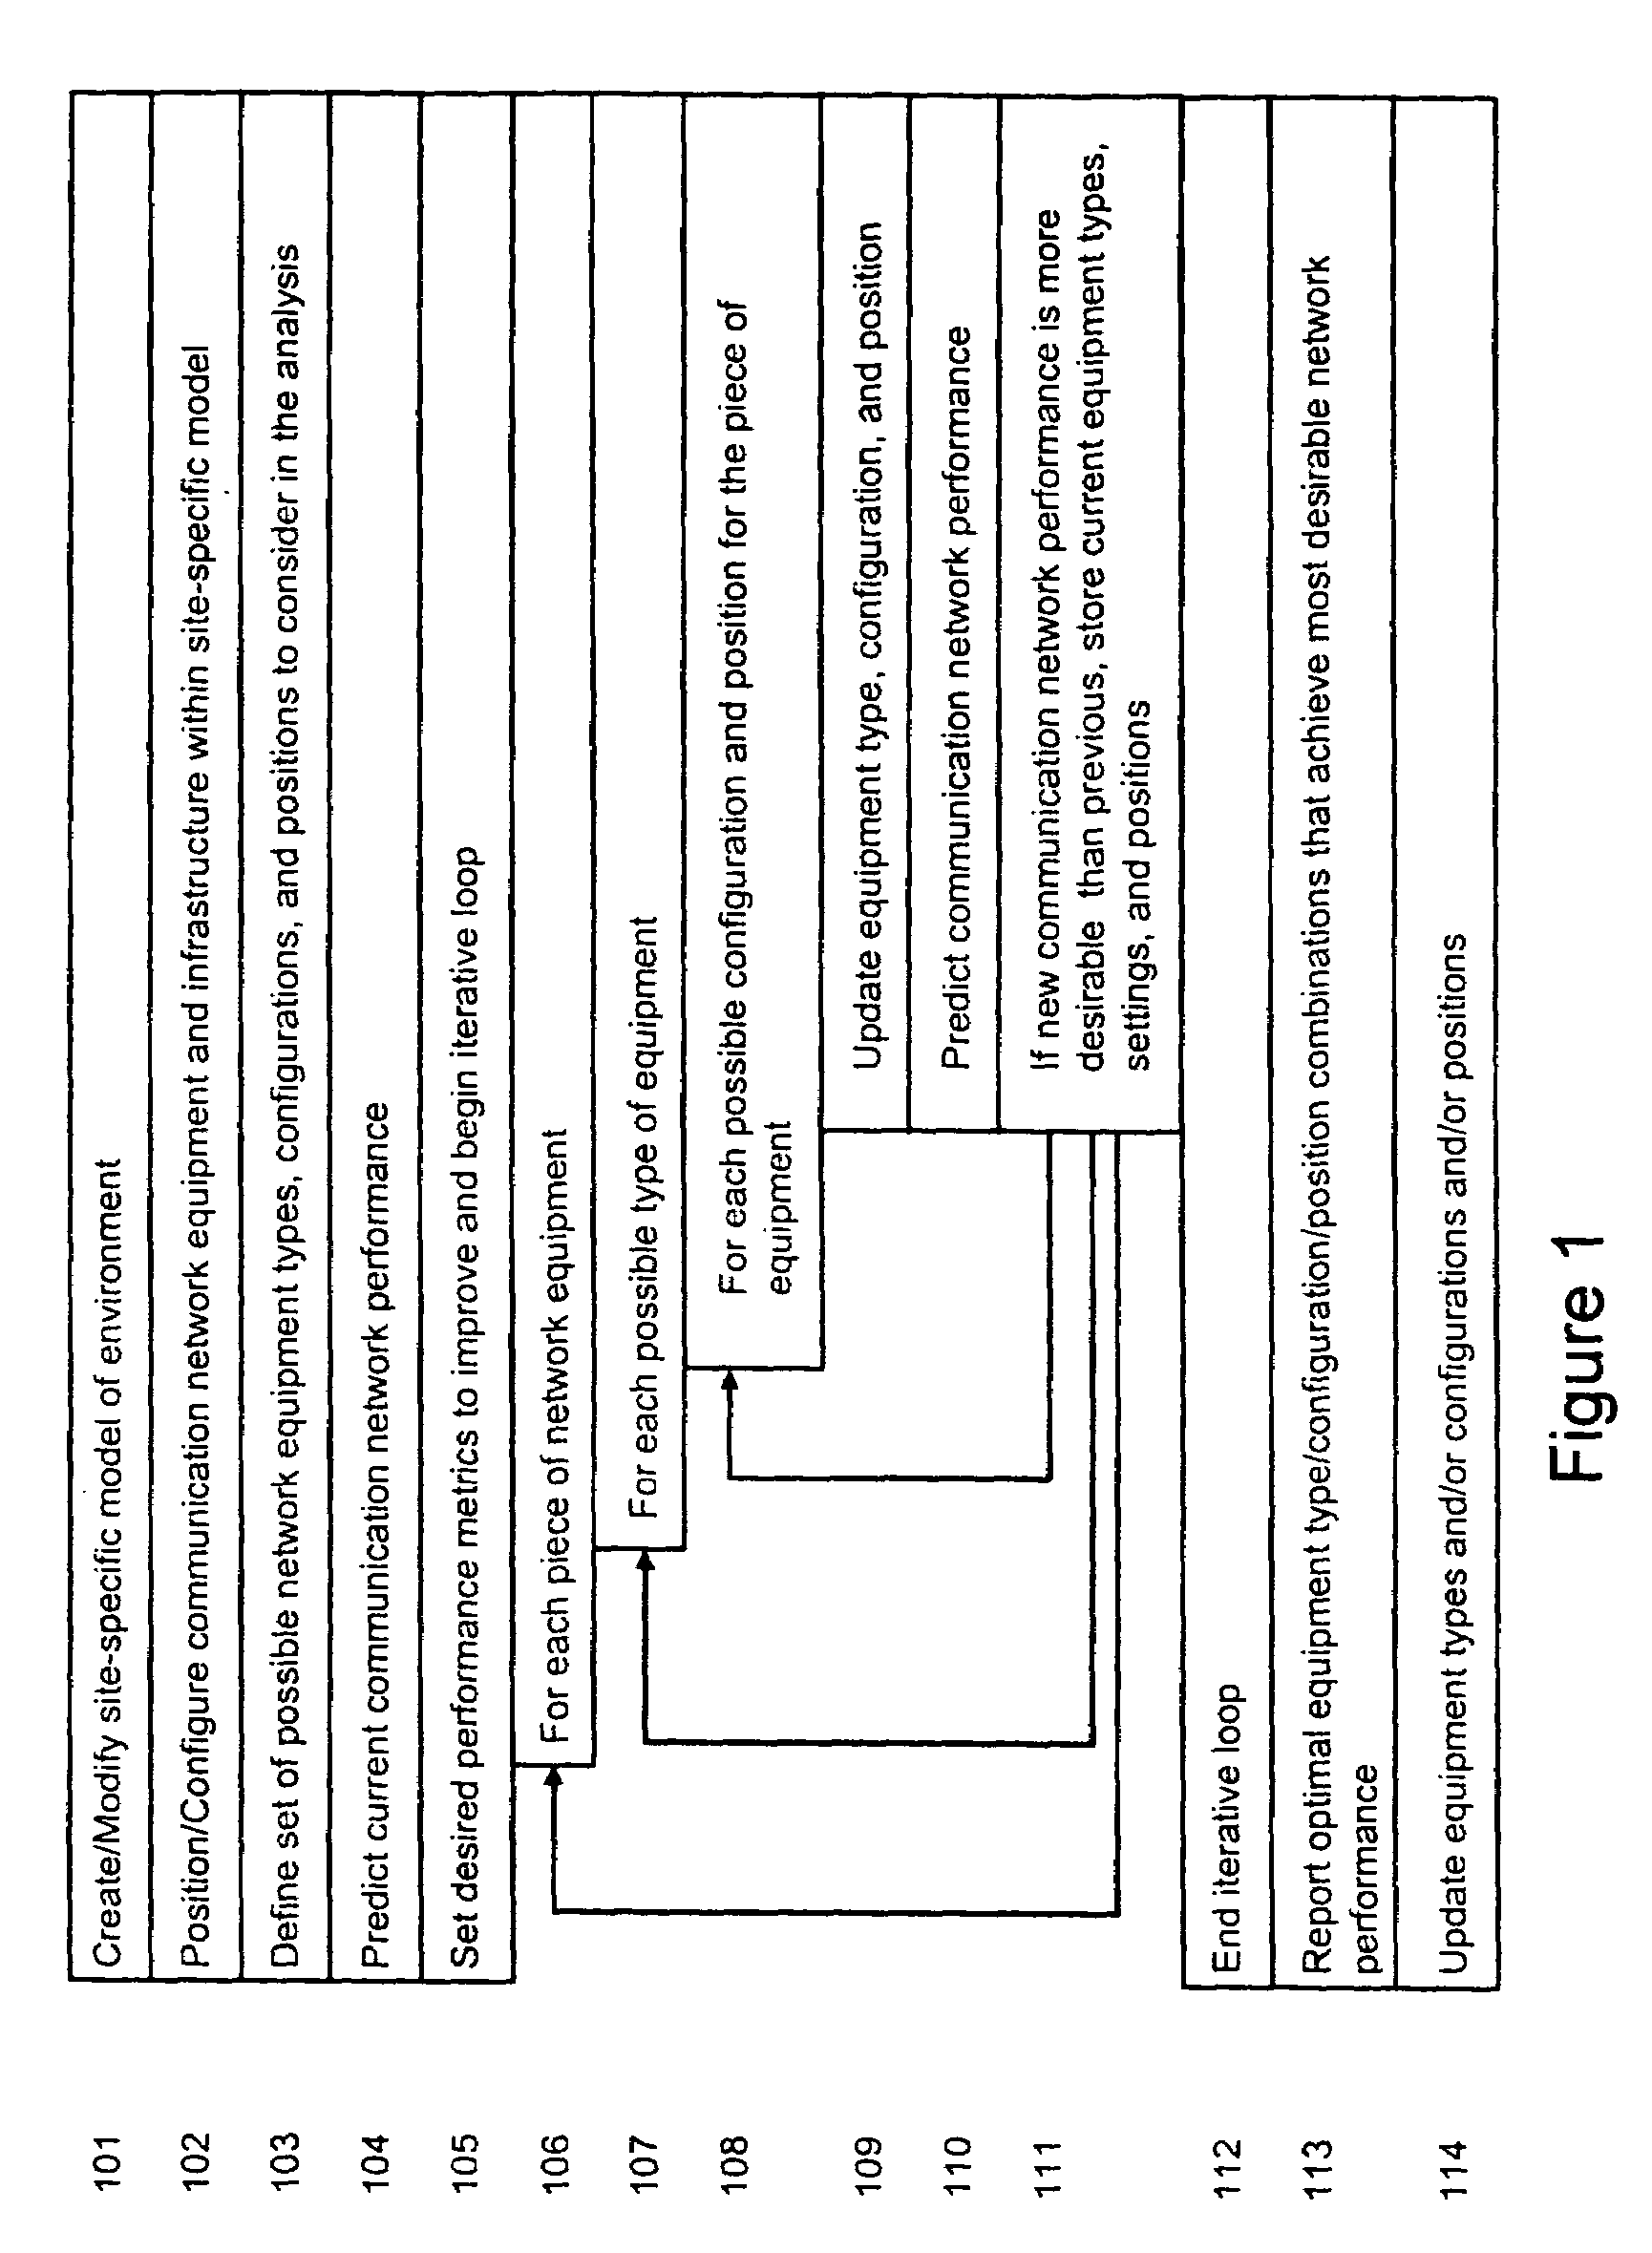 System and method for indicating the presence or physical location of persons or devices in a site specific representation of a physical environment